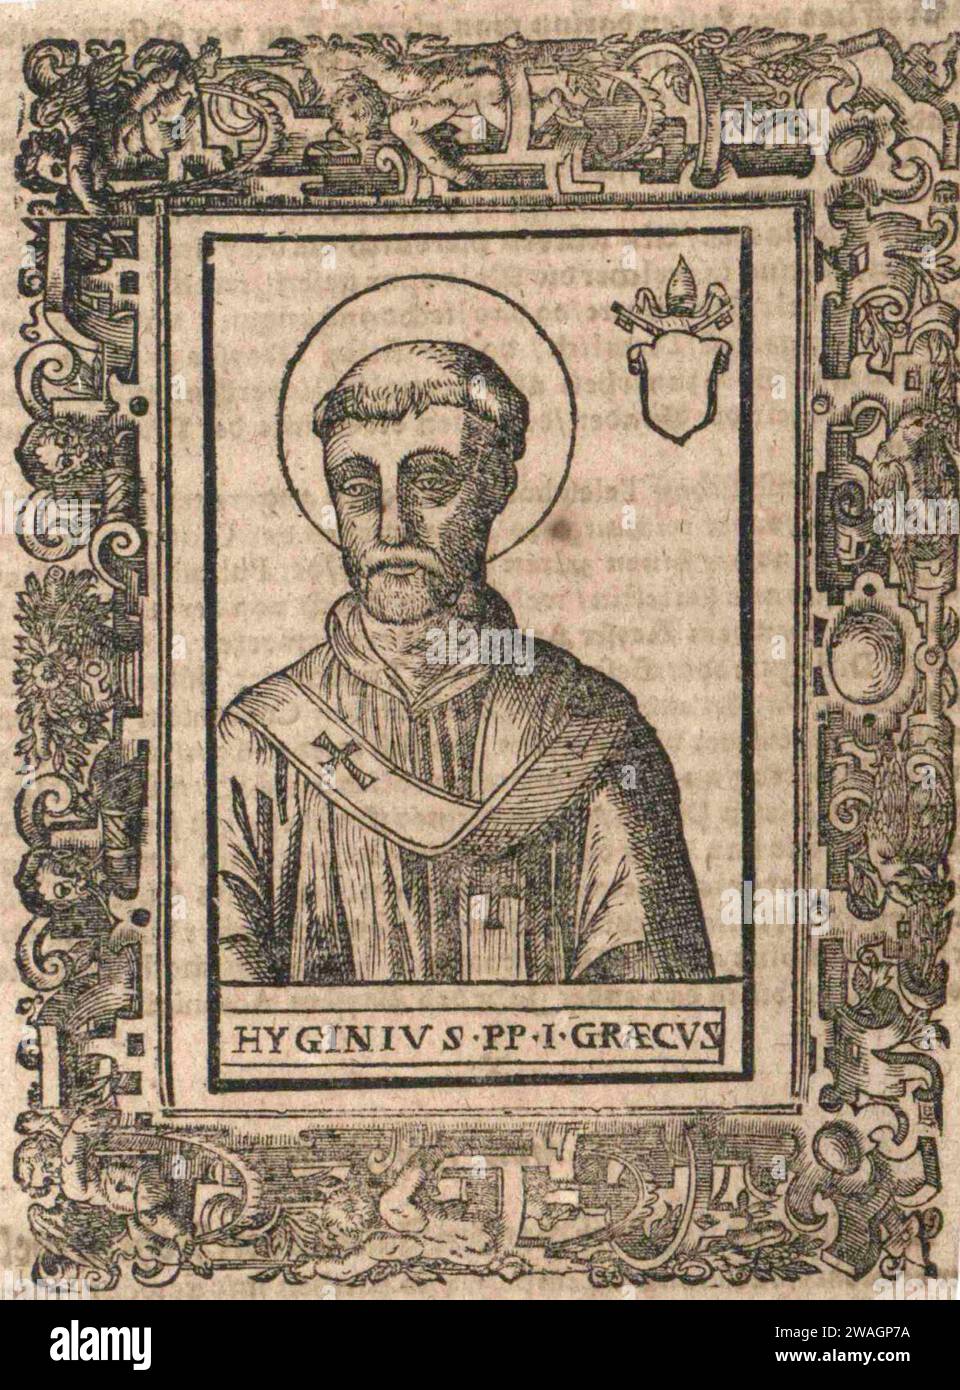 A 16th Century engraving of Pope Hyginus, who was pontiff from AD136 to AD140. He was the ninth pope. He was Greek and it was he that introduced the idea of godparents to help baptised children during their Christian life and duties. Stock Photo